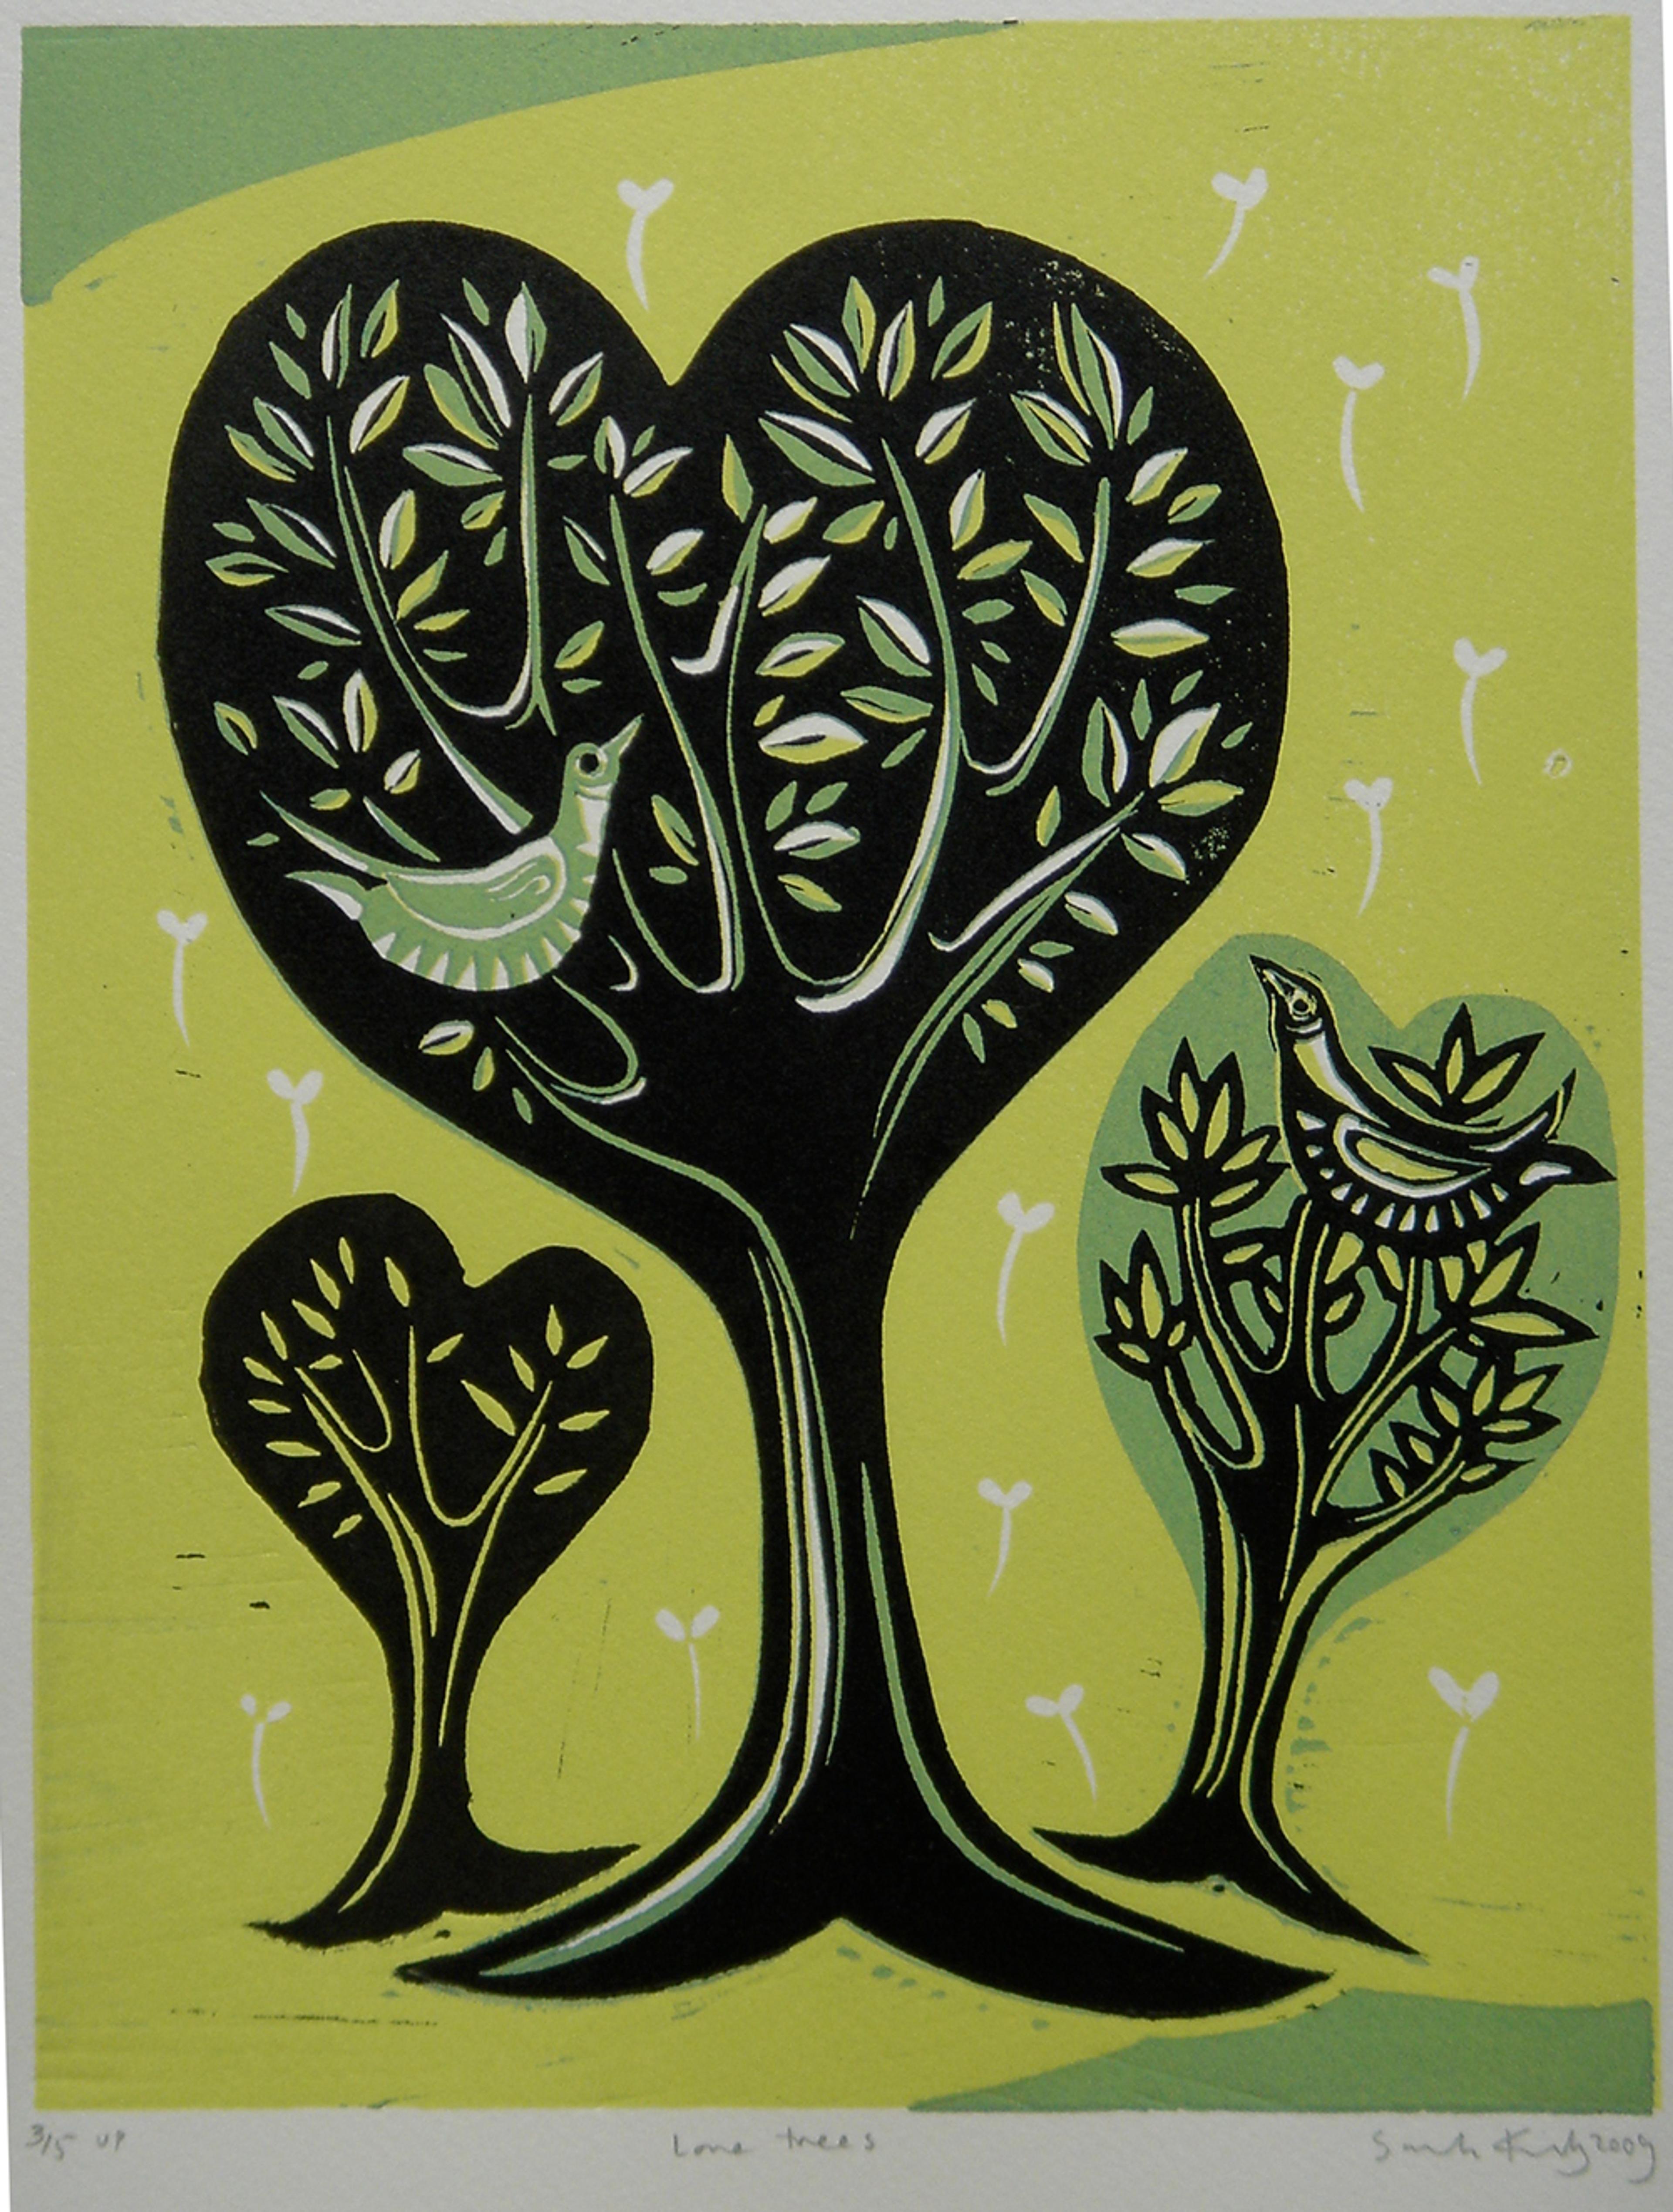 illustrative linocut print of trees shaped in hearts; variations of green